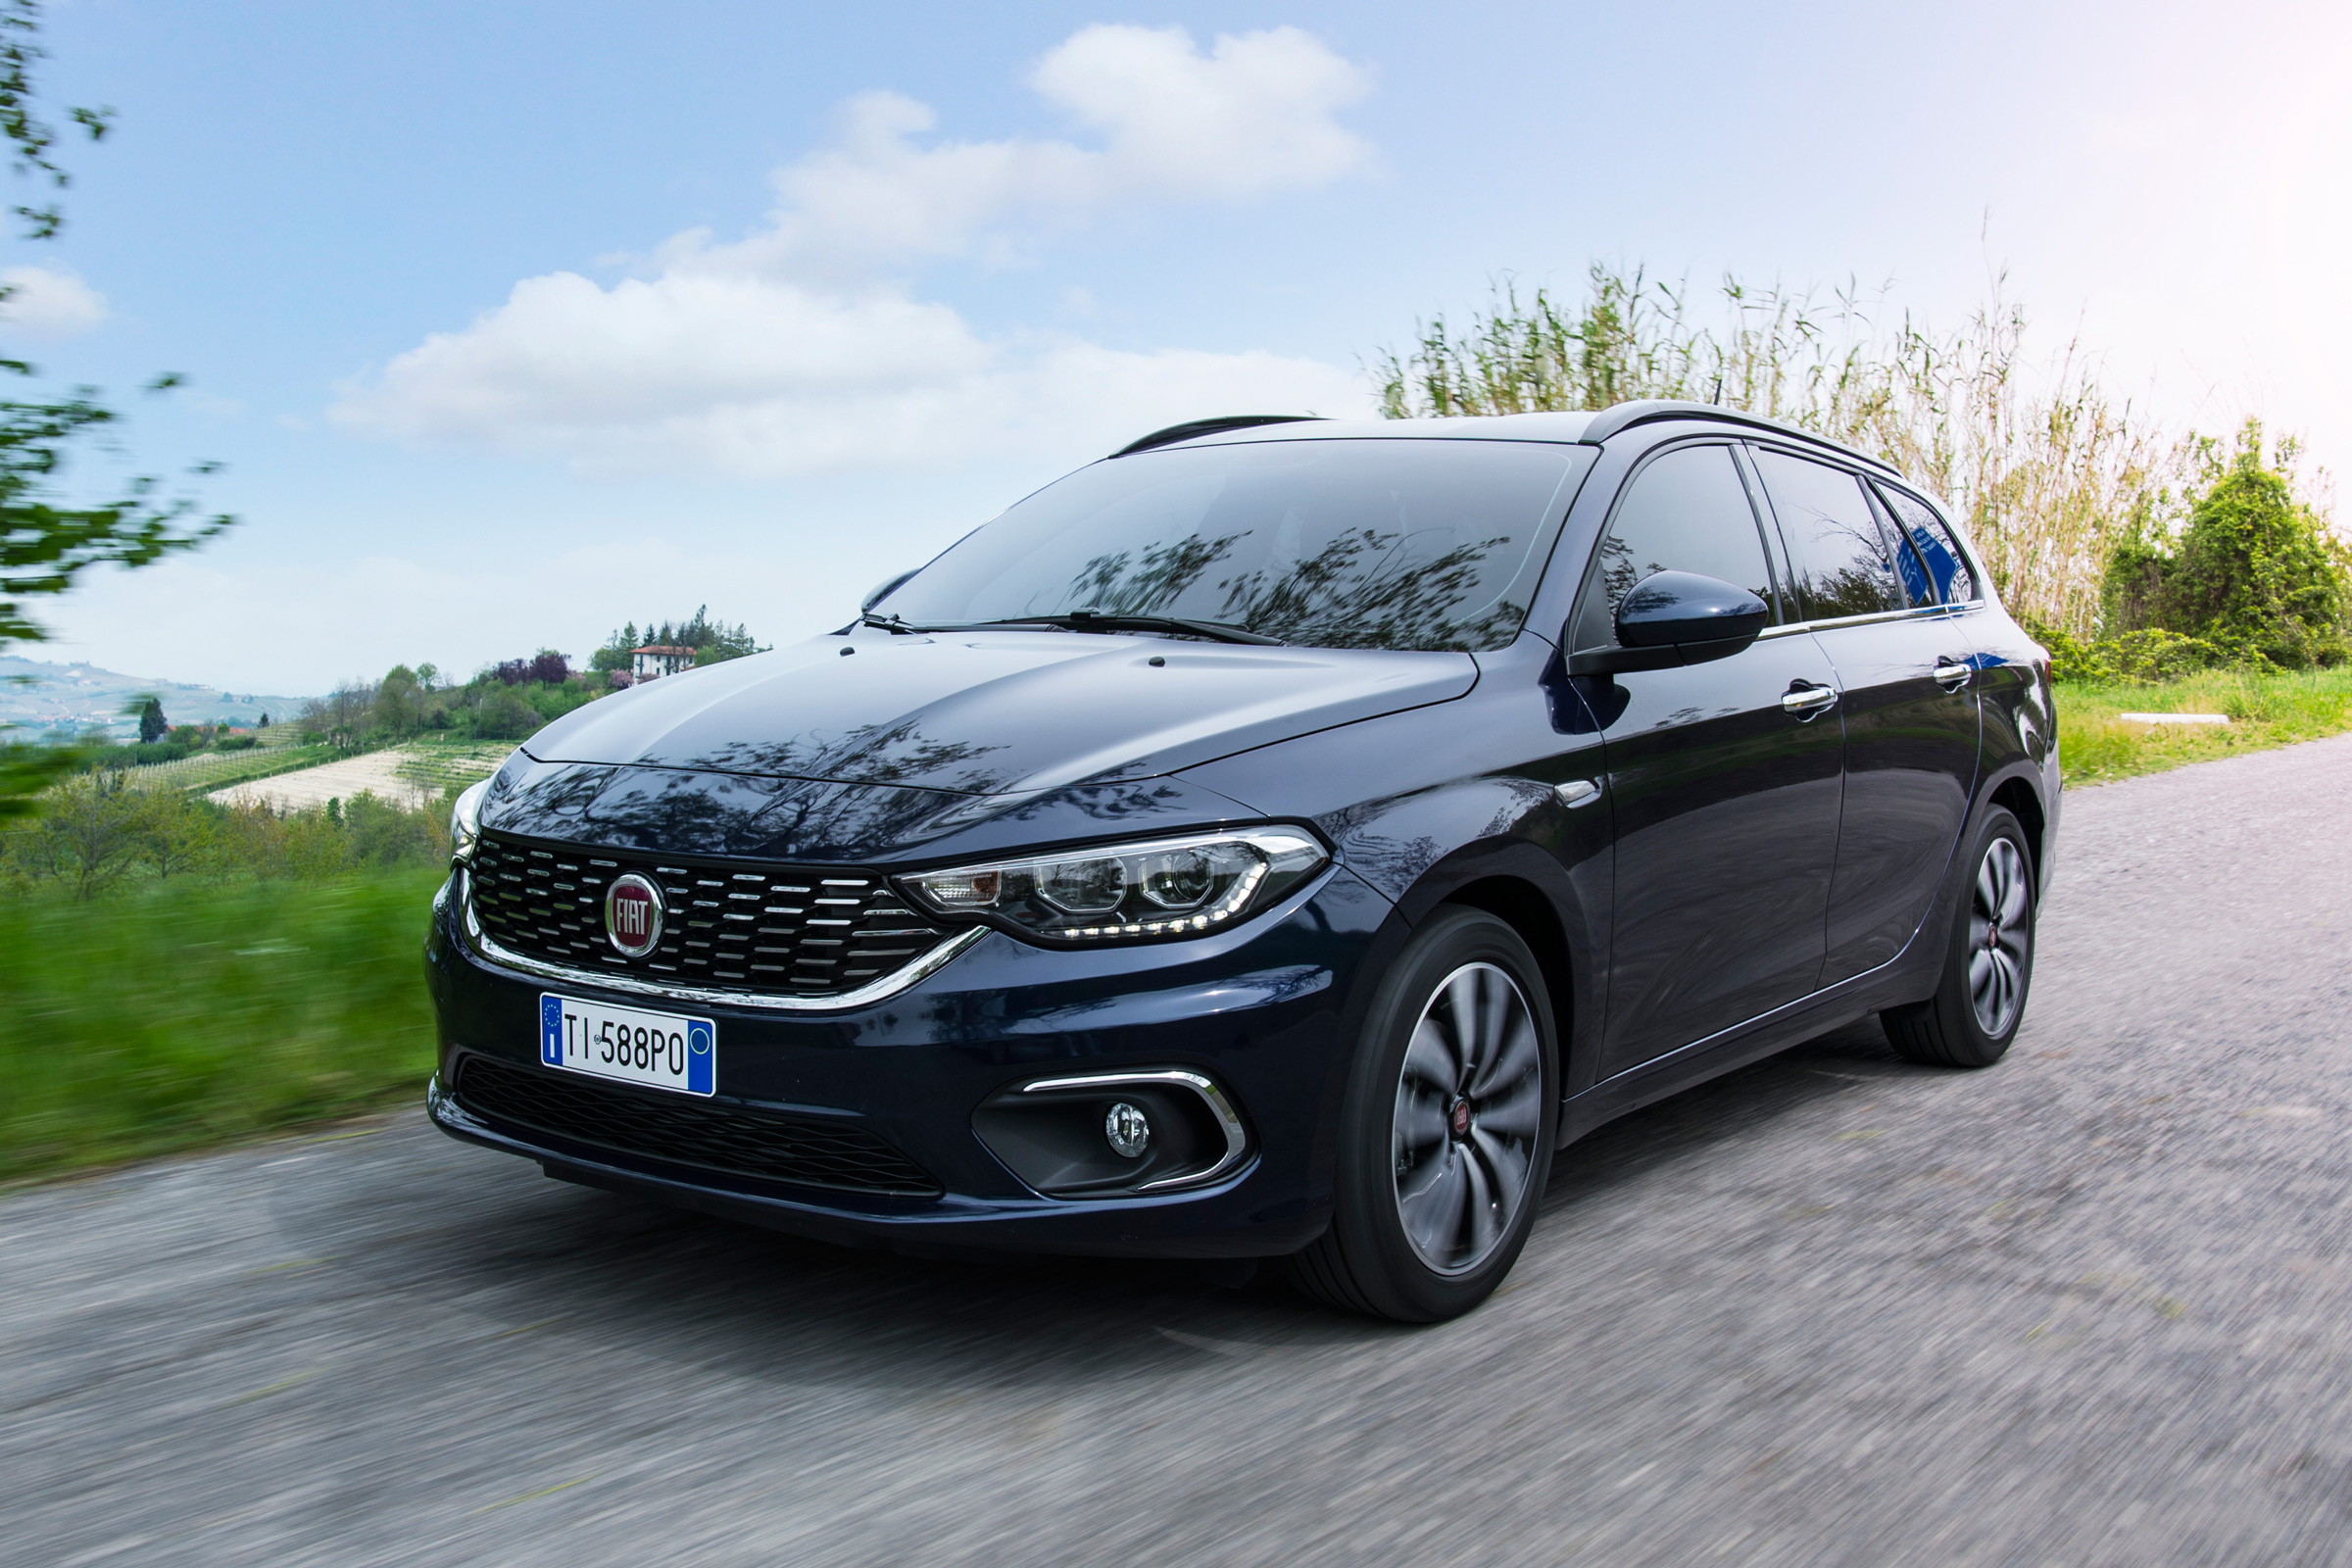 Fiat Tipo 356, Outstanding Cars, 5 Trer, Auto Review, 2400x1600 HD Desktop